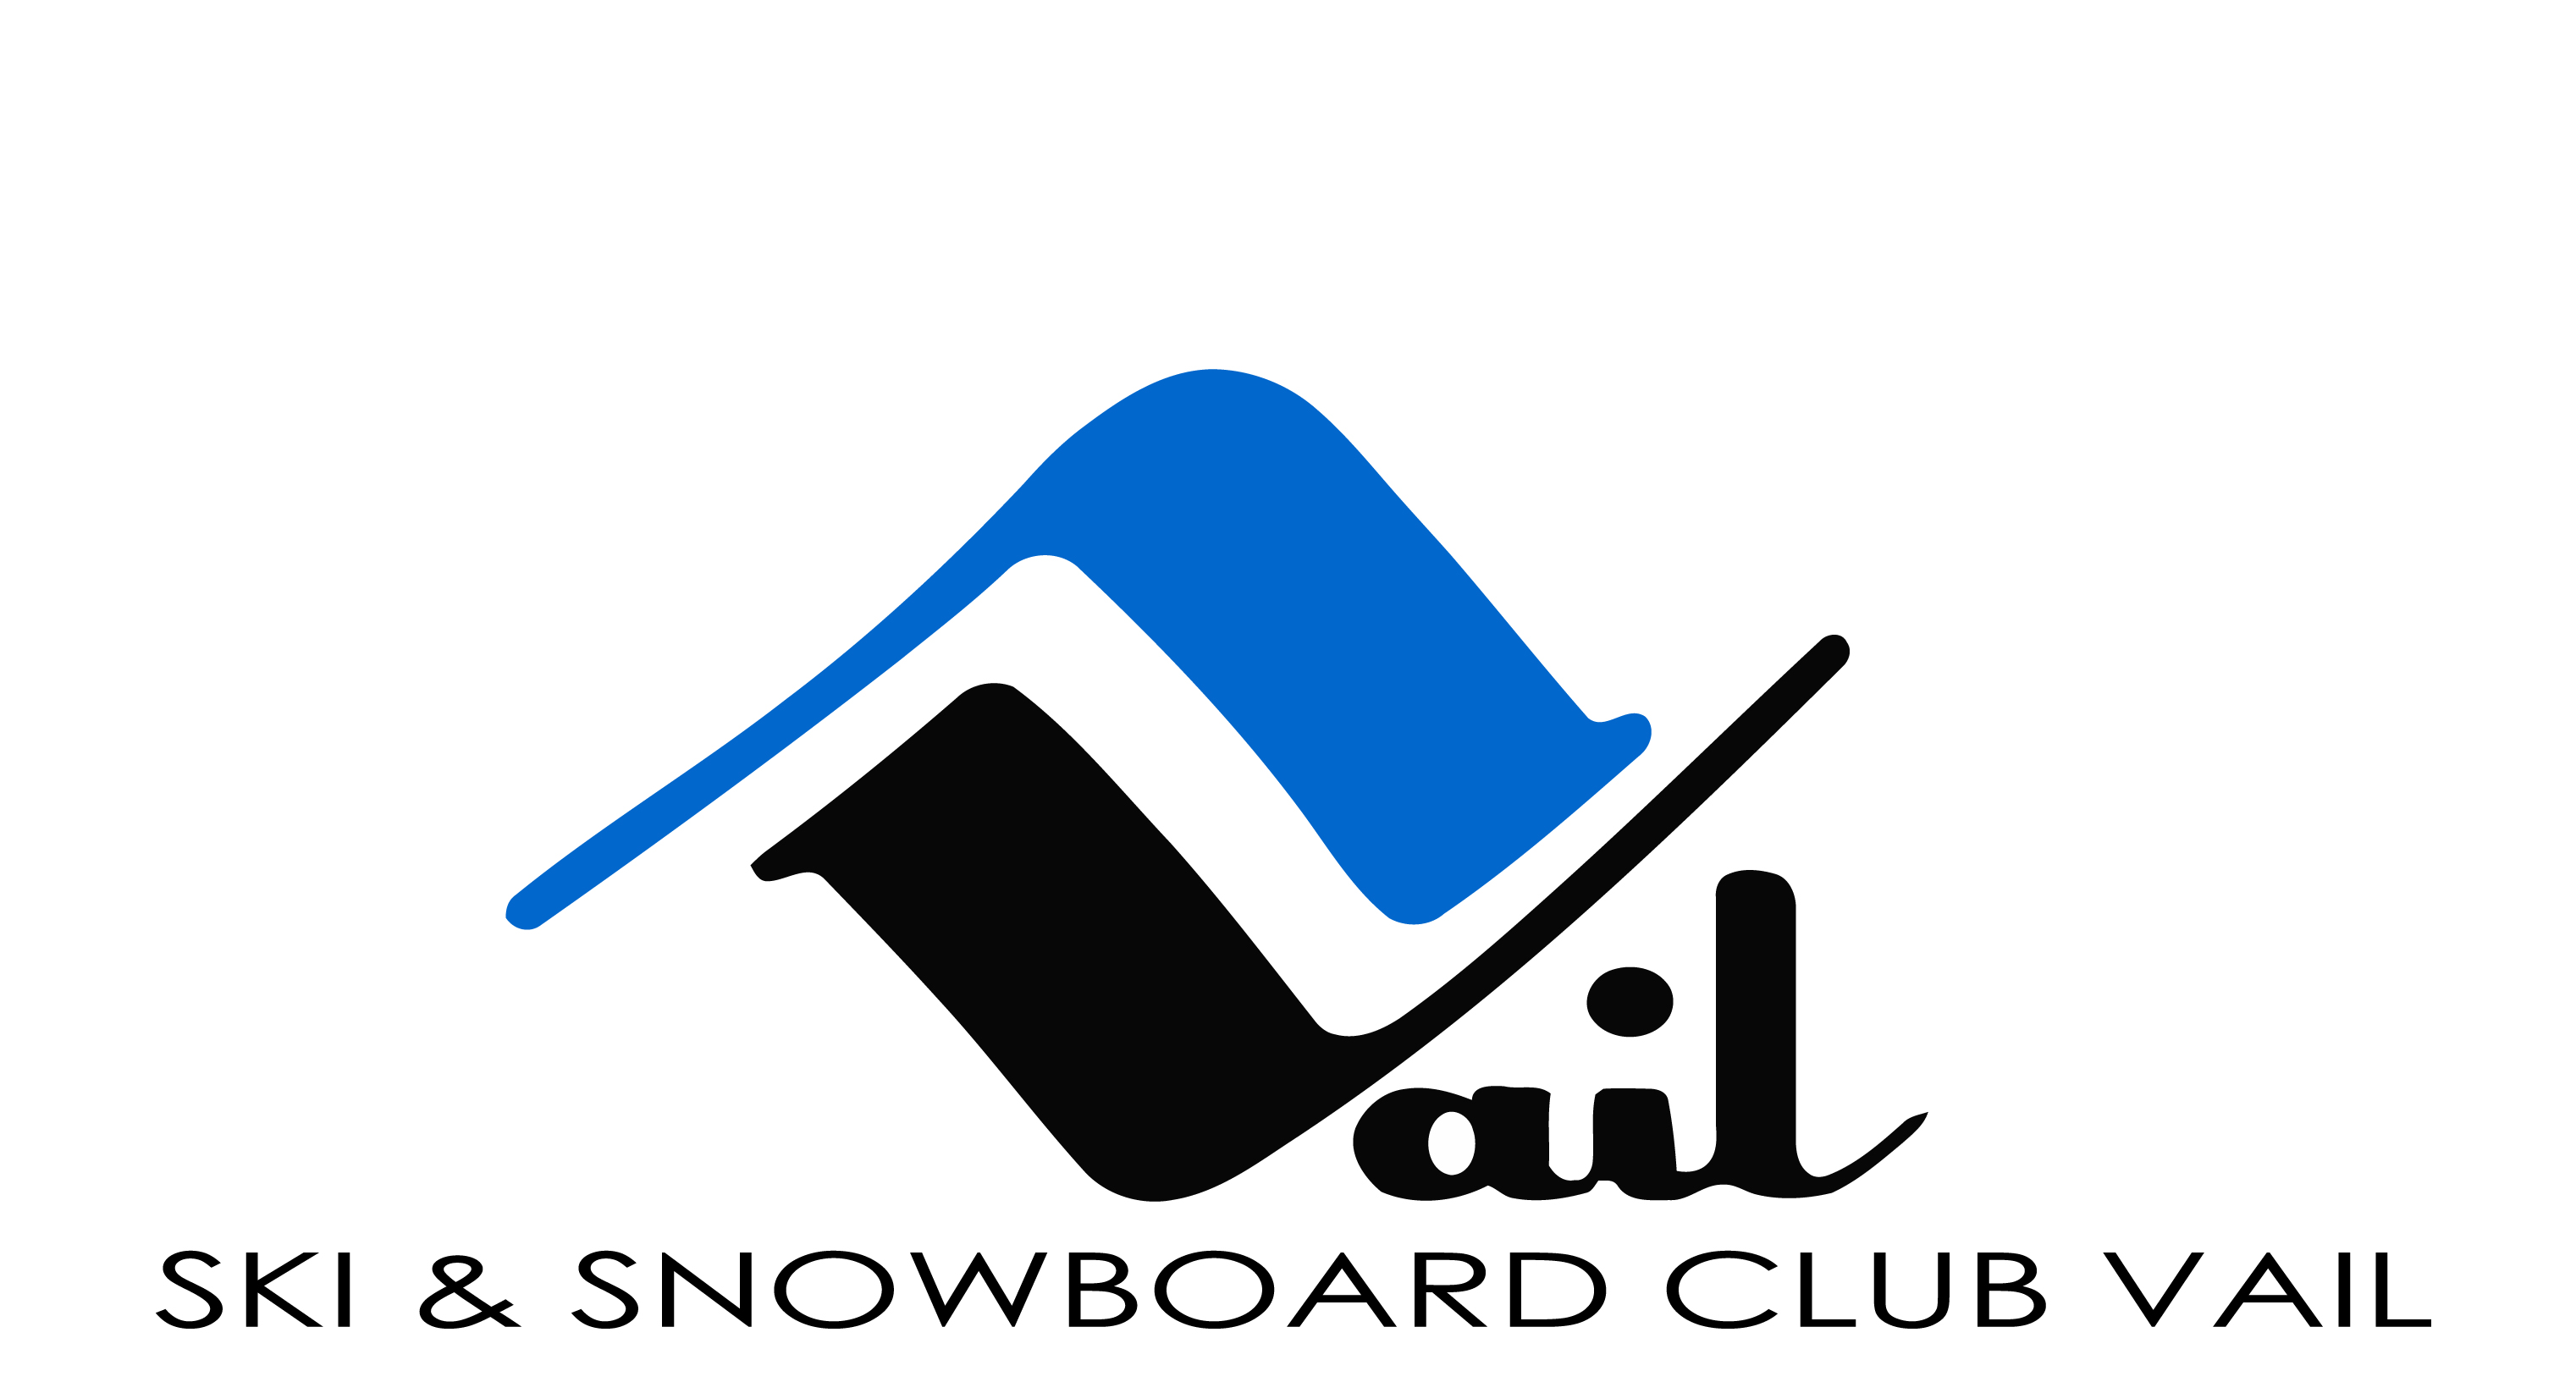 TOBE is proud to partner with Ski Club Vail Mogul Team